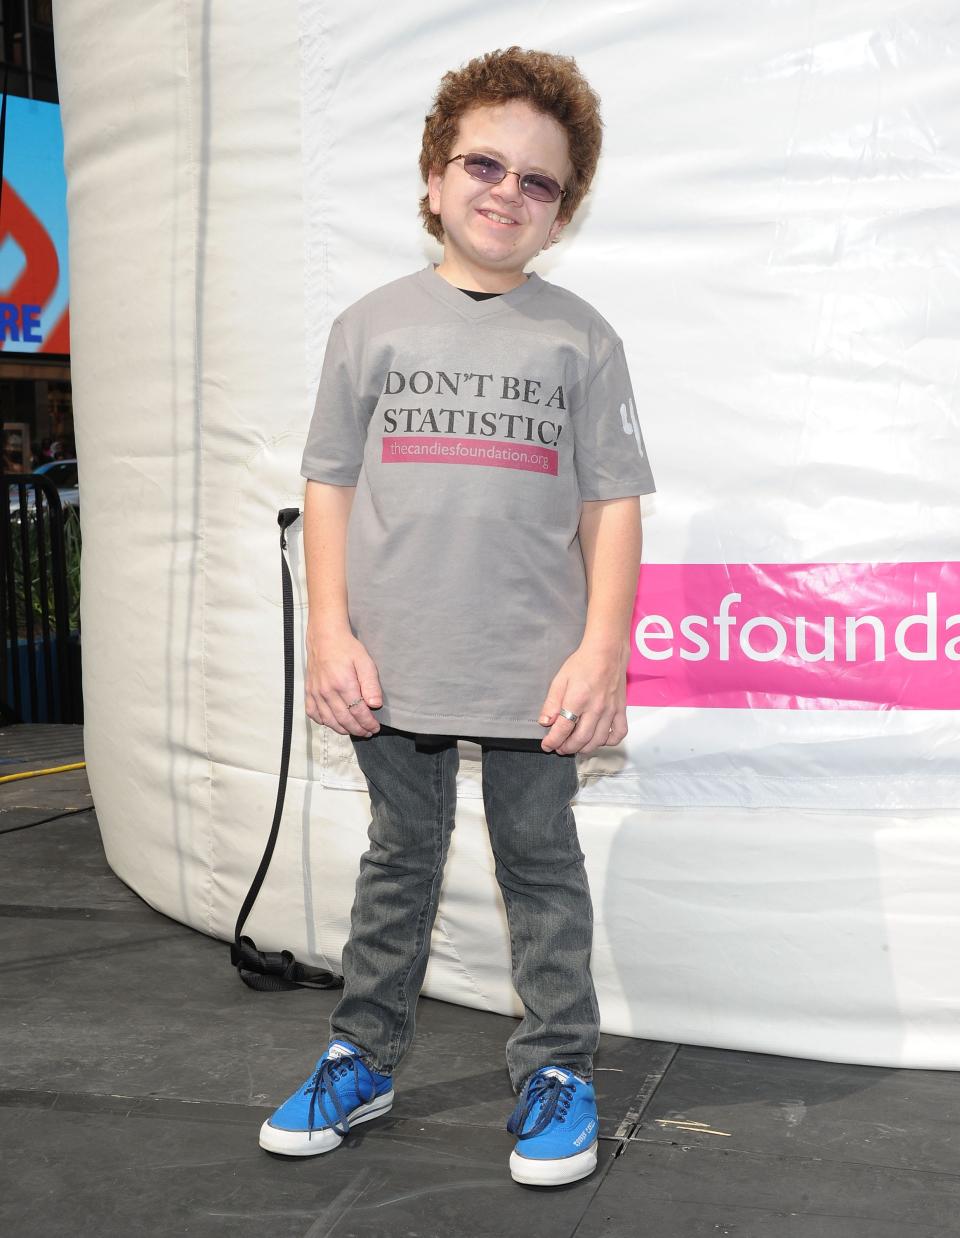 Keenan Cahill, viral YouTube lip syncer, dies aged 27 after problems from surgical procedure